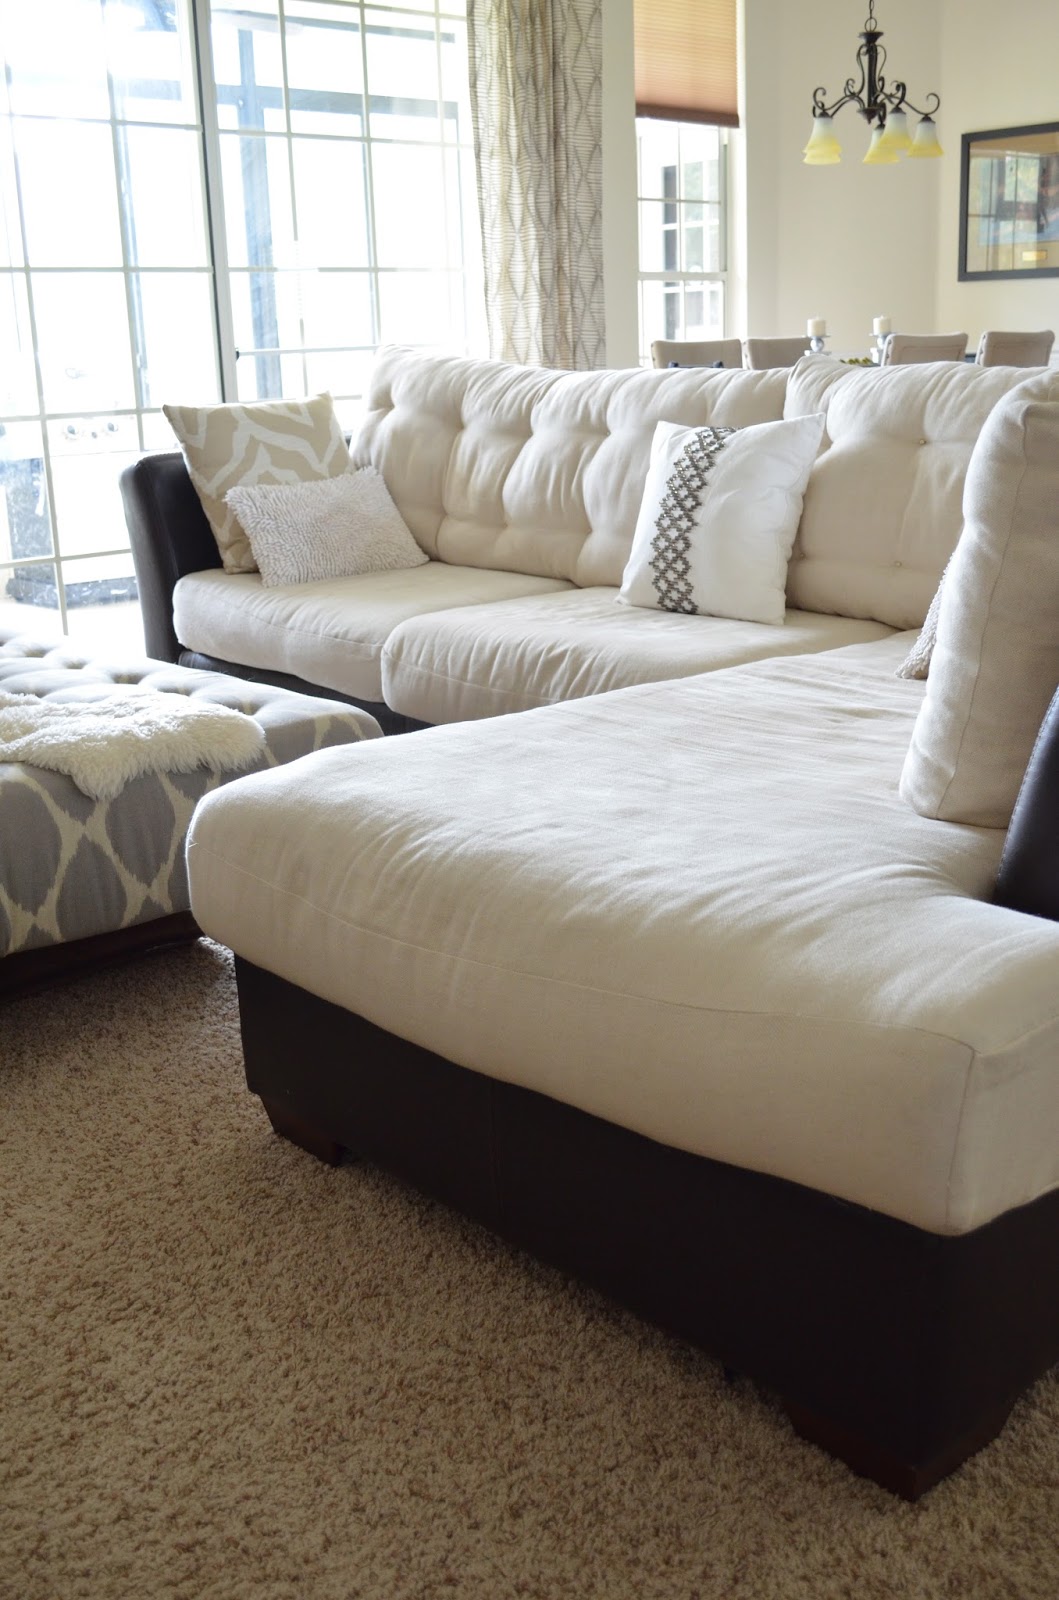 Inside Out Design How To Do Buttonless Tufting On Couch Cushions